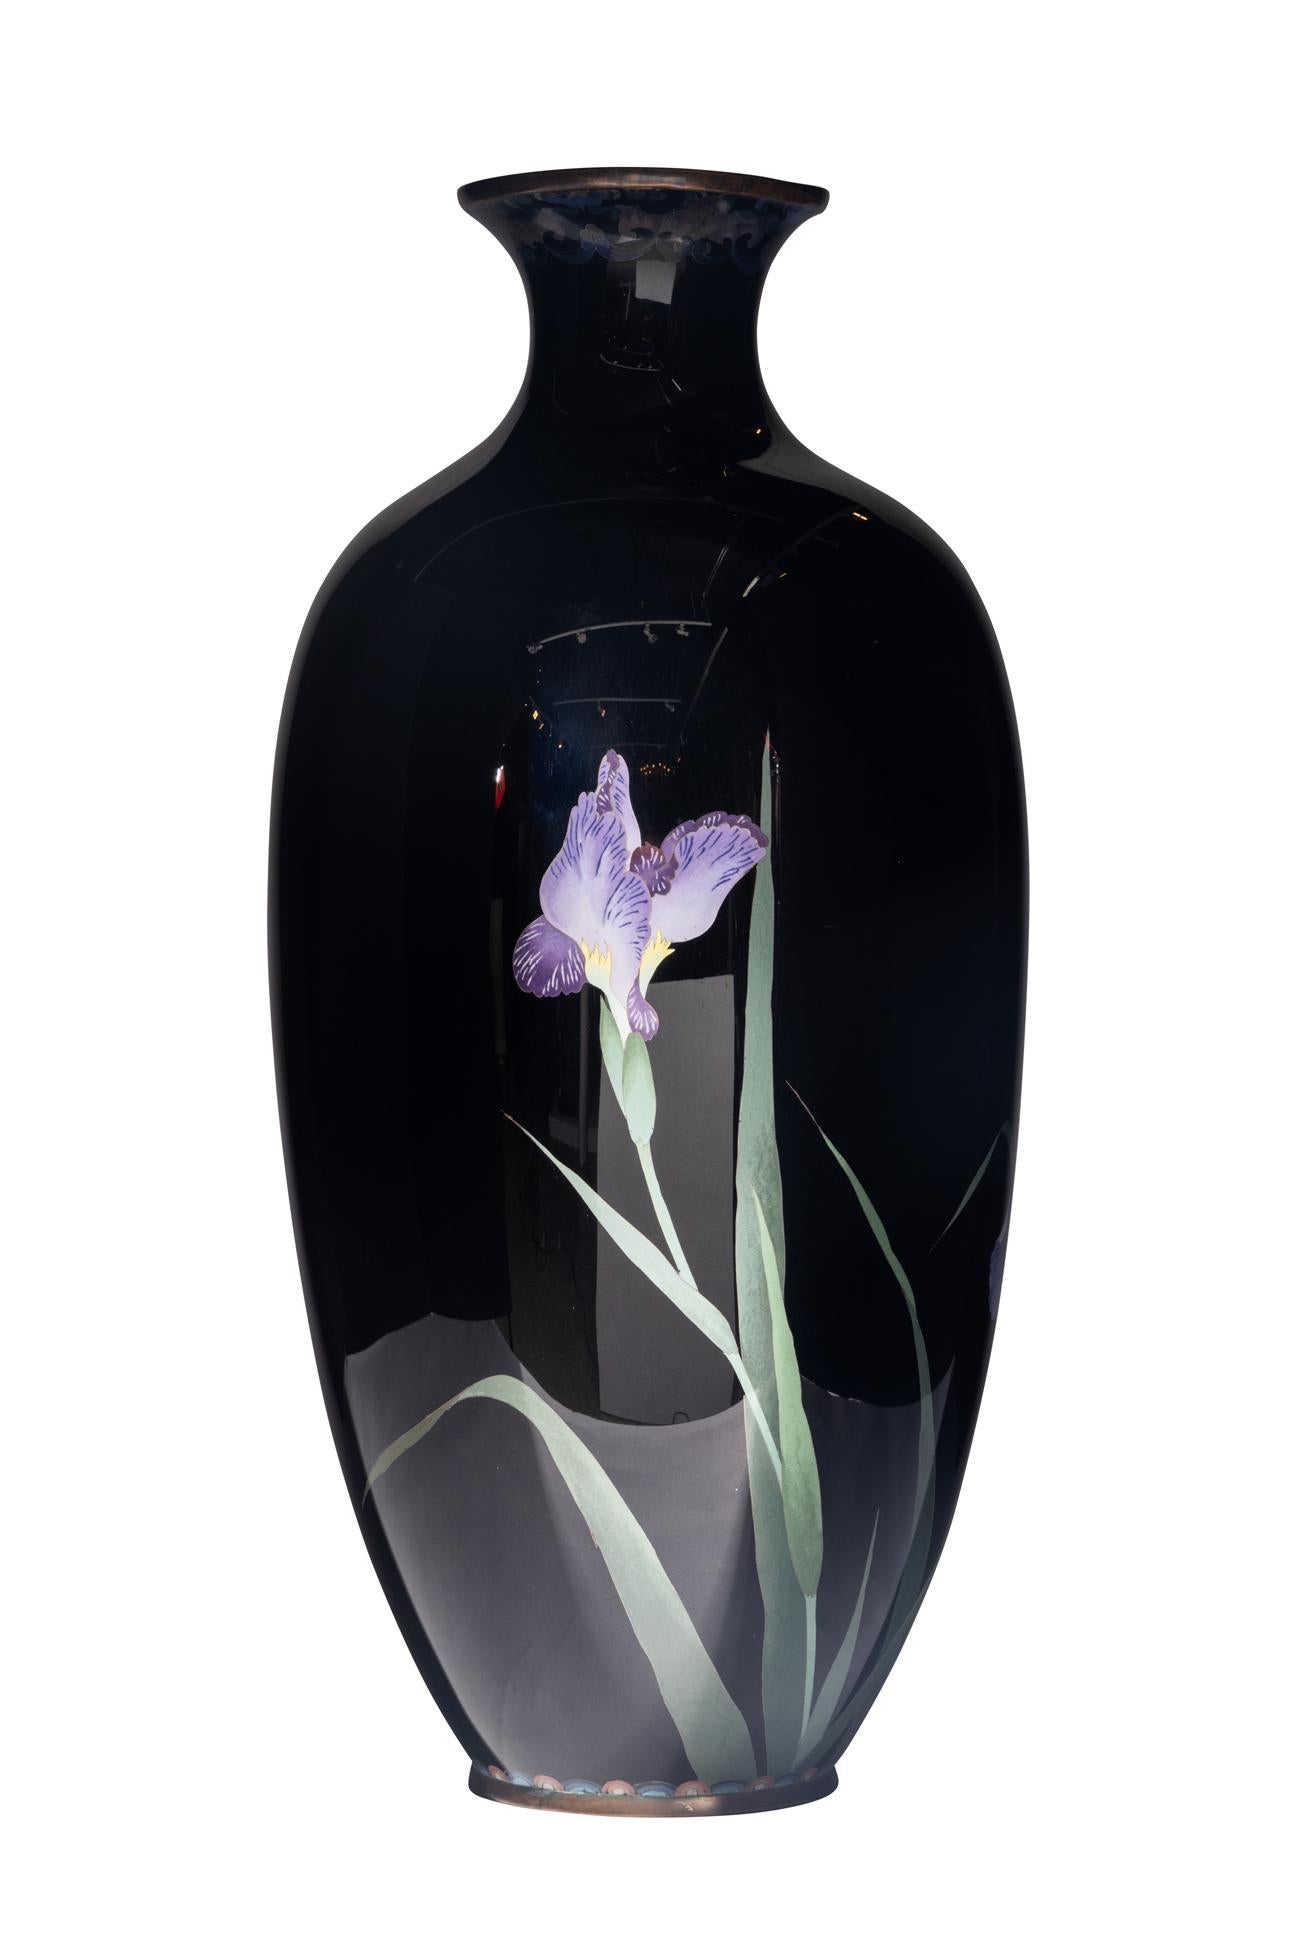 Introducing a magnificent Large Meiji Period Japanese Cloisonné Enamel Vase adorned with enchanting iris blossoms. This extraordinary vase encapsulates the essence of Japanese artistry during the Meiji era, showcasing the exquisite beauty of